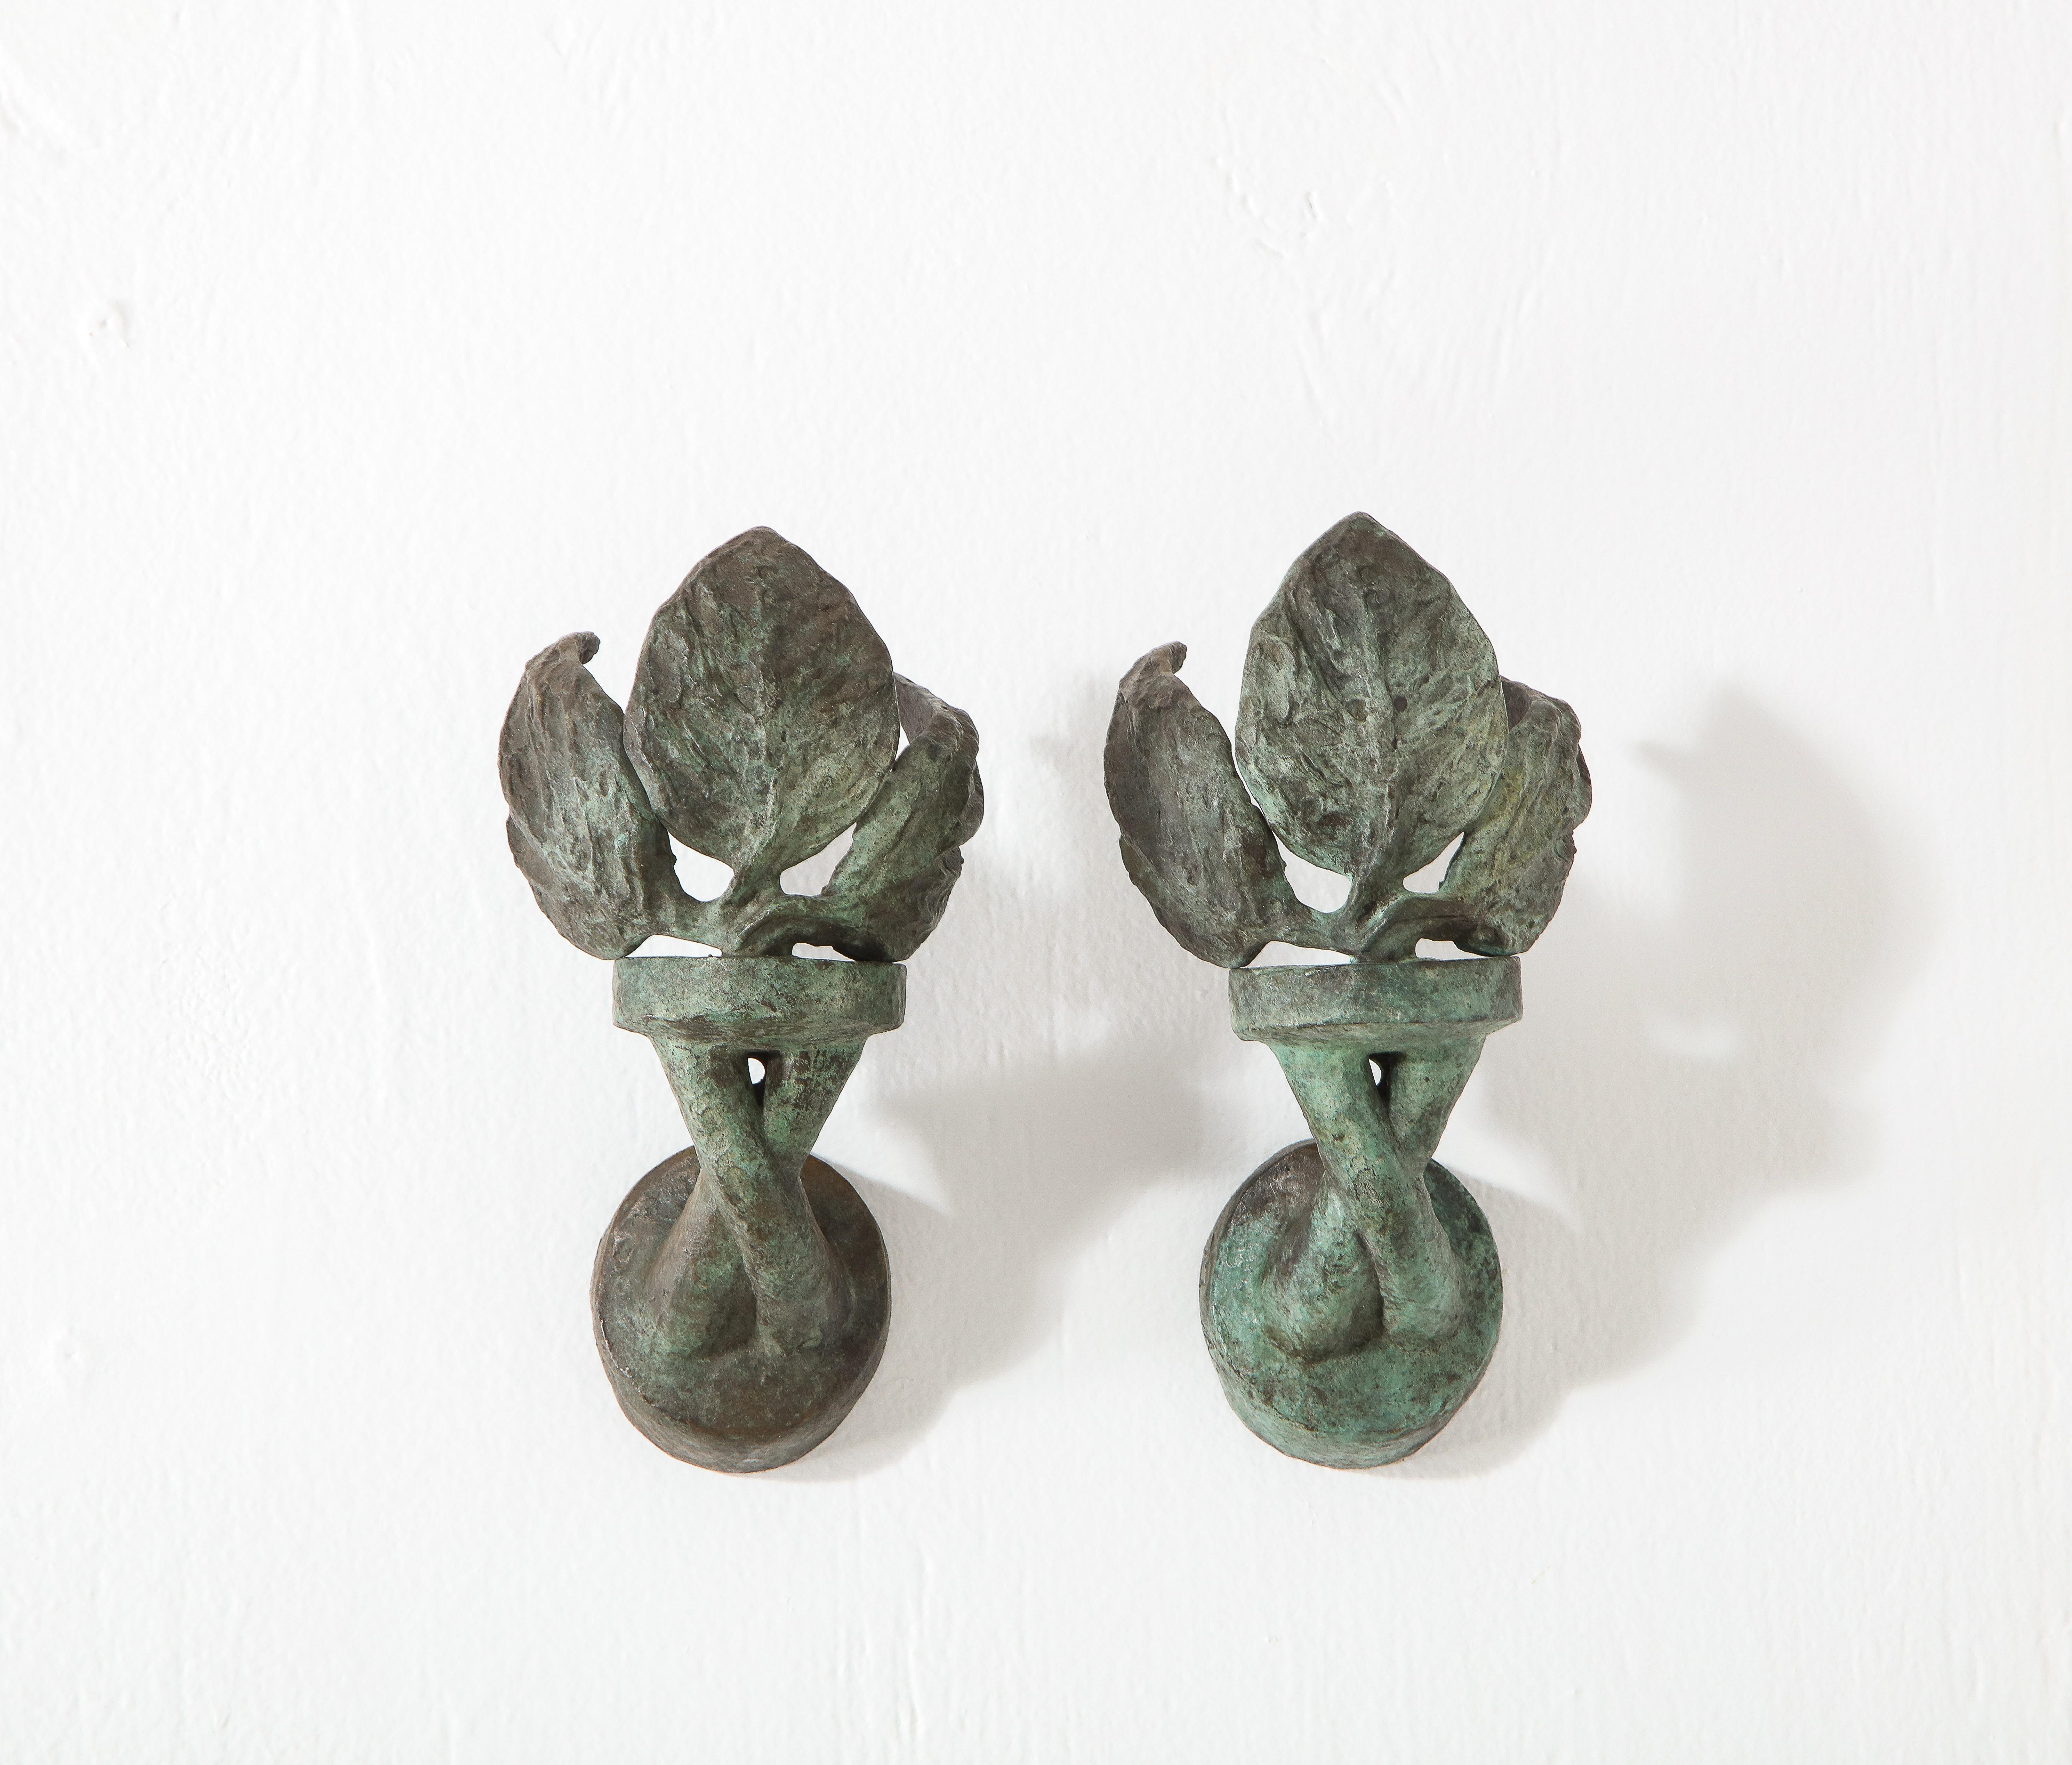 Exceptional pair of Philippe Anthonioz sconces in cast bronze with verdigris patina. Stamped with the foundry mark and the artist signature, this pair was authenticated by Mrs. Anthonioz.

Custom fabricated backplate included with purchase. Details